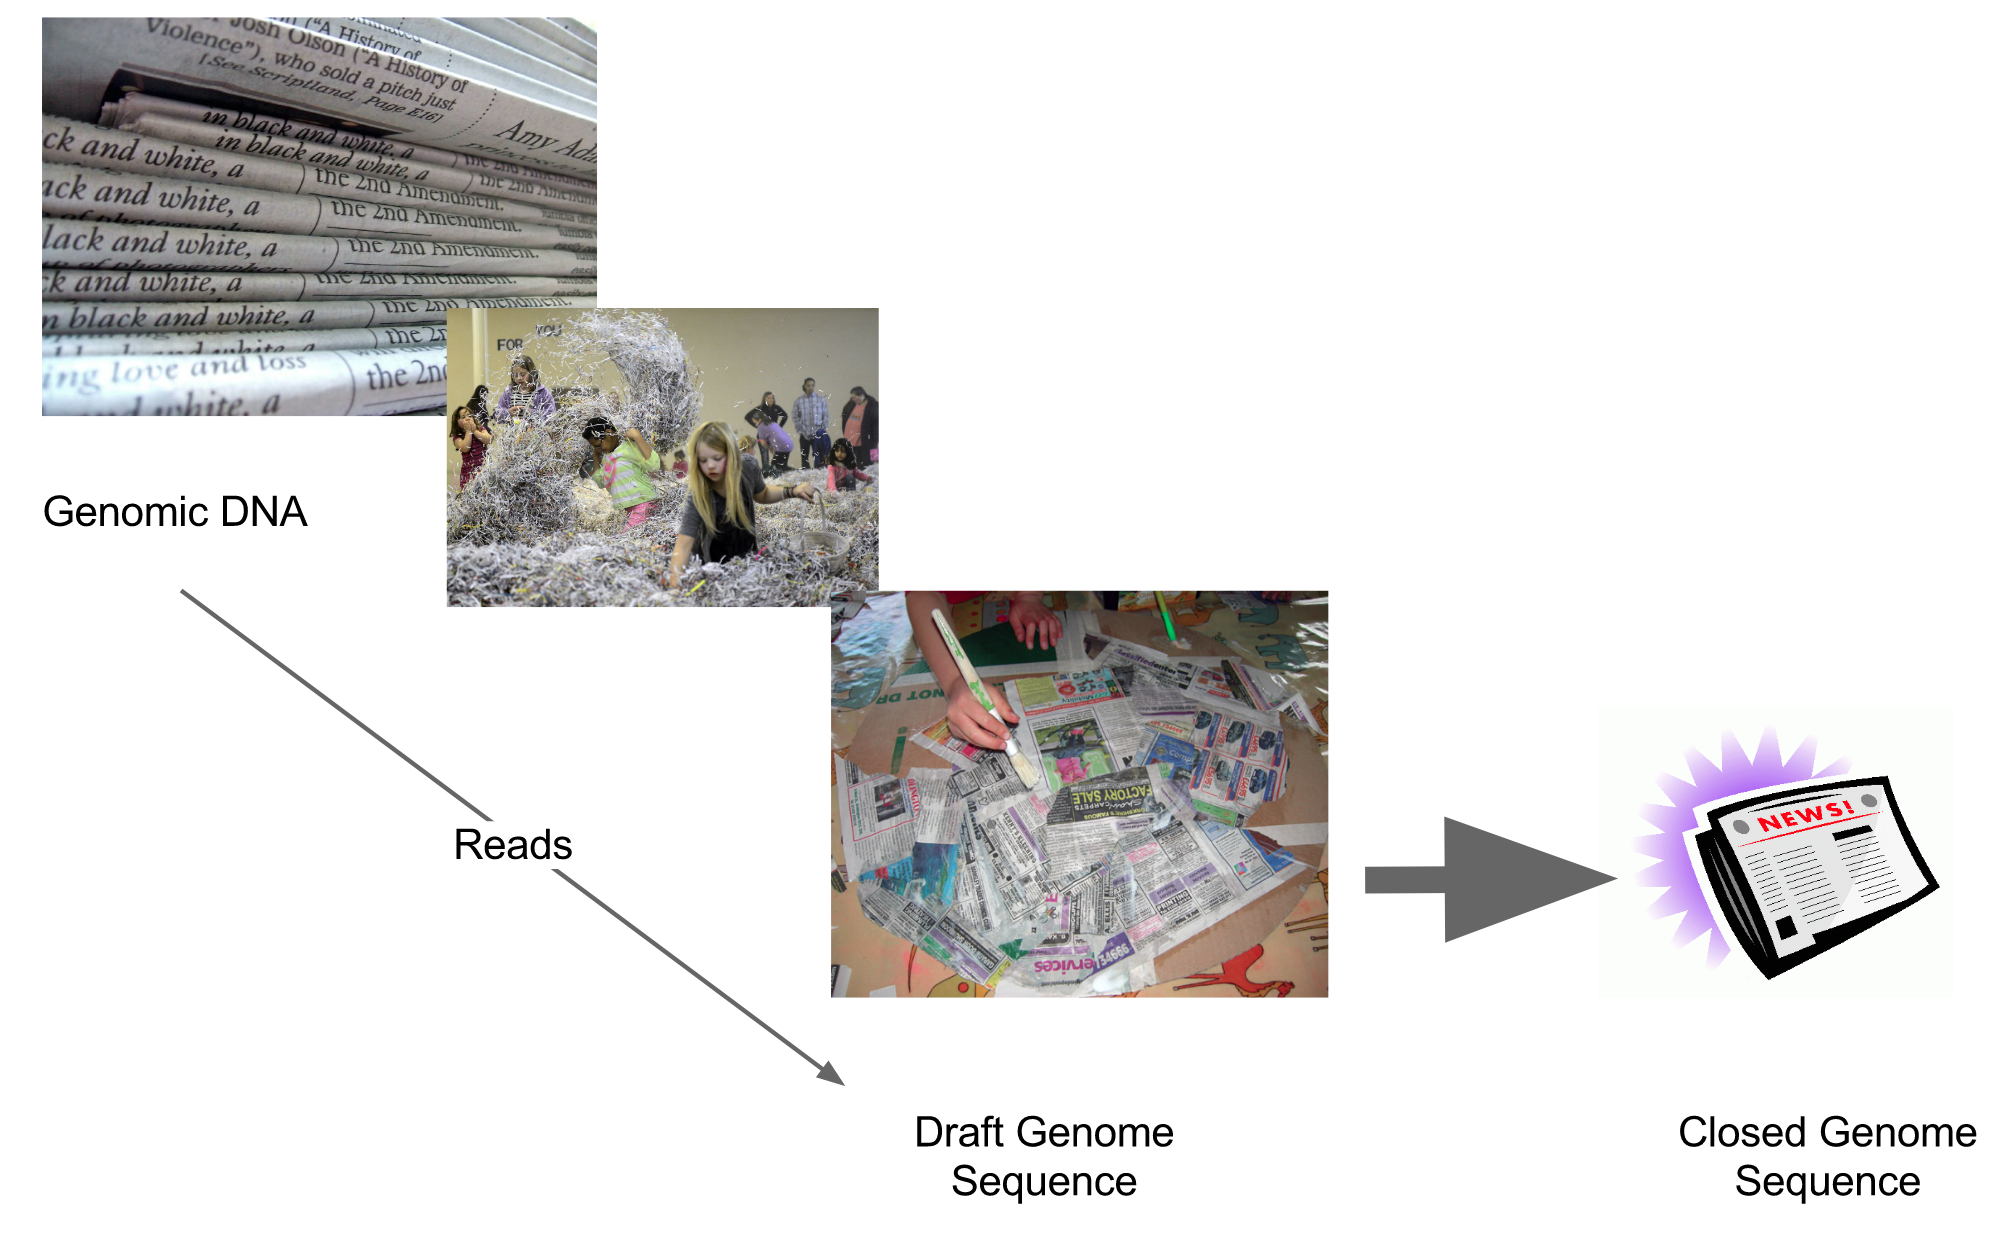 A stack of newspapers is labelled genomic DNA. A line labelled points an image of a room full of shredded paper and people inside, labelled reads. Then the line continues to a pile of newspaper clippings reading draft genome sequence, and finally to closed genome sequence with a cartoon of a newspaper.